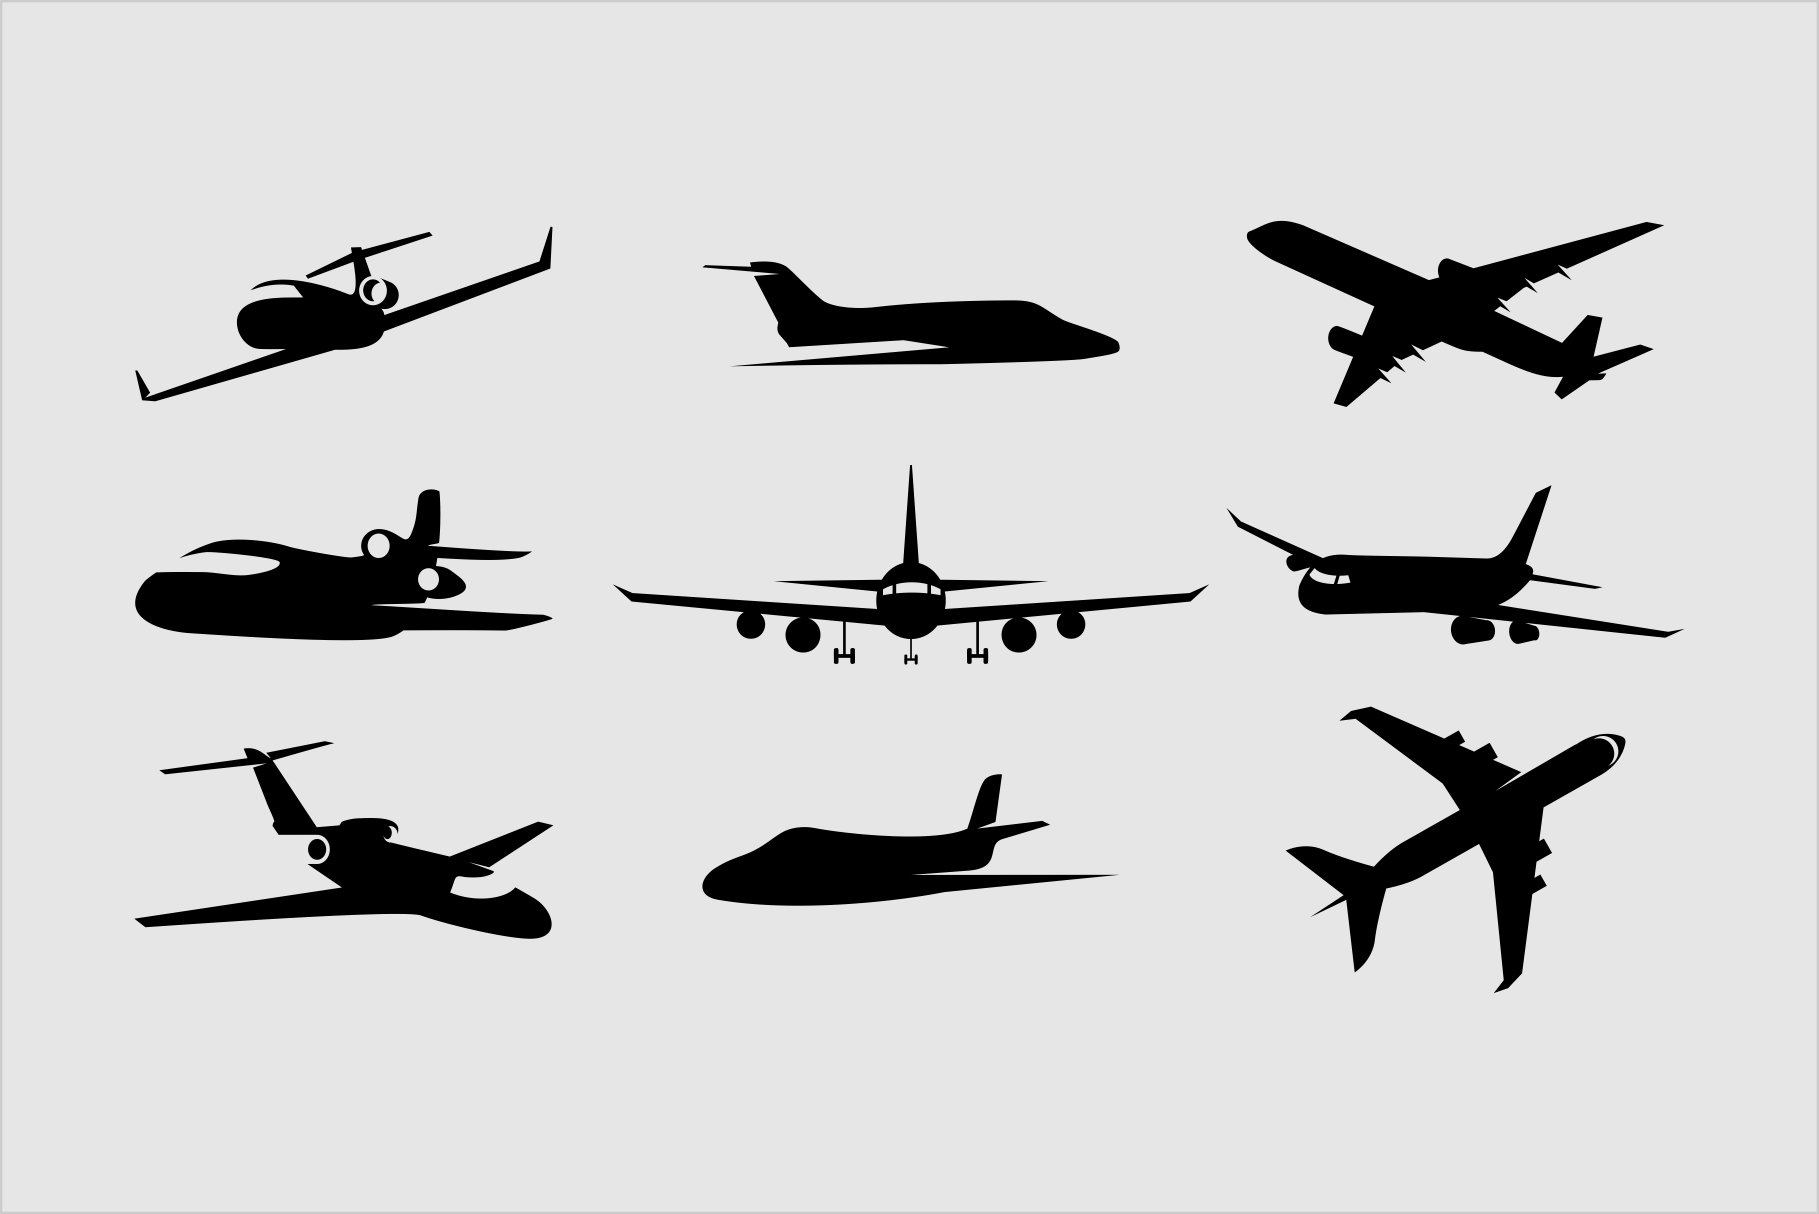 Airplane Shapes For Logoscover image.